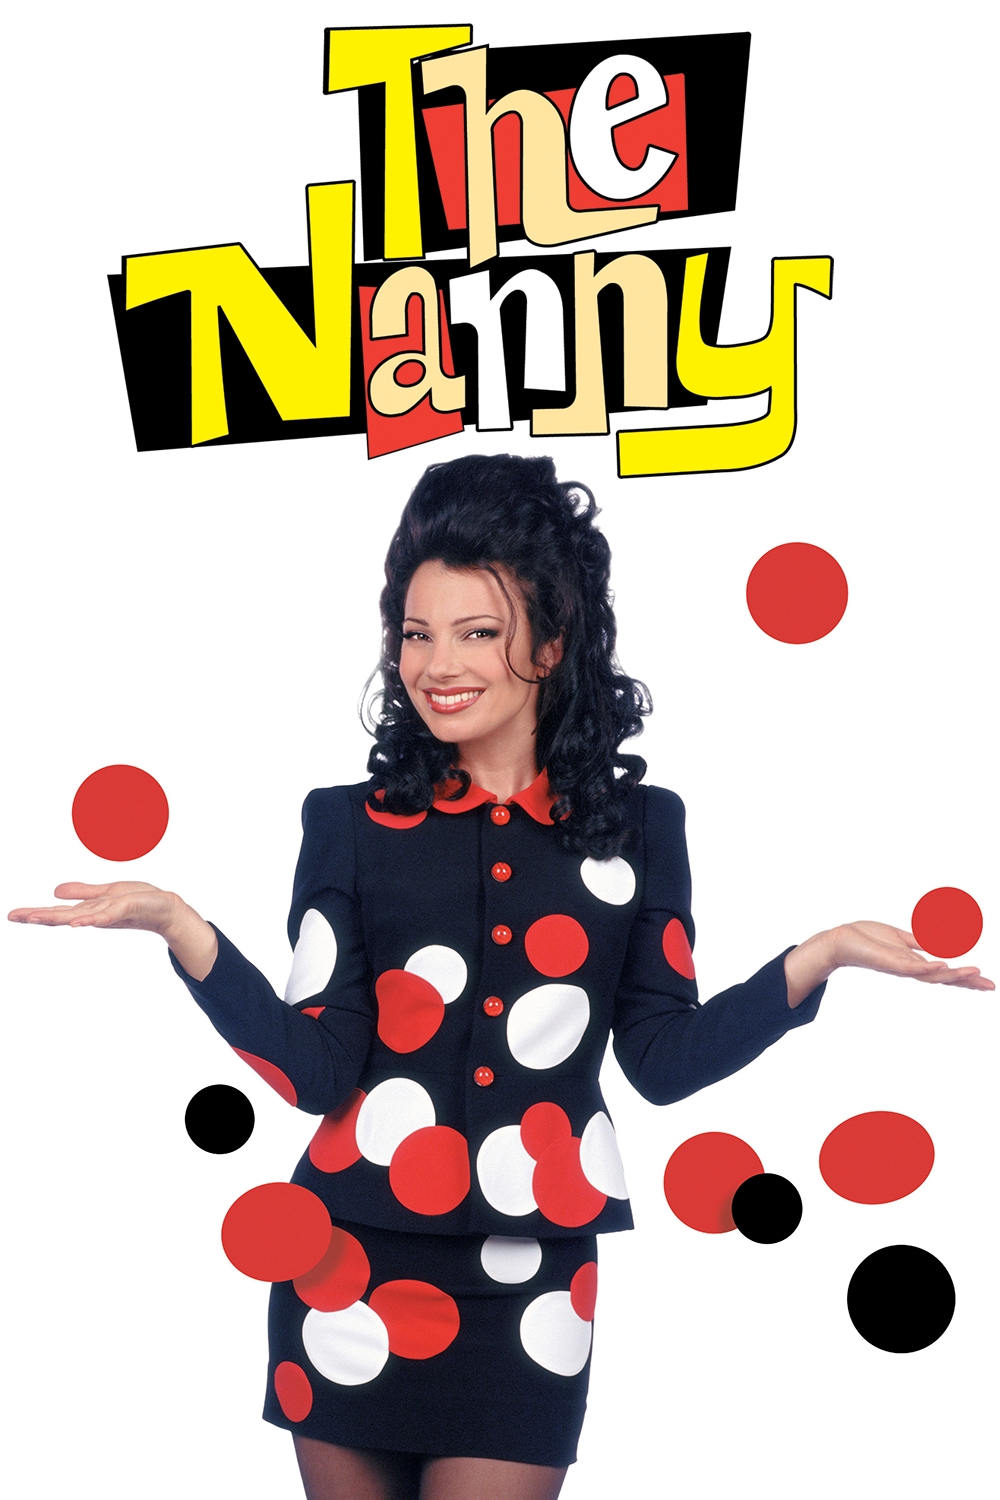 how to see nanny season 6 online free